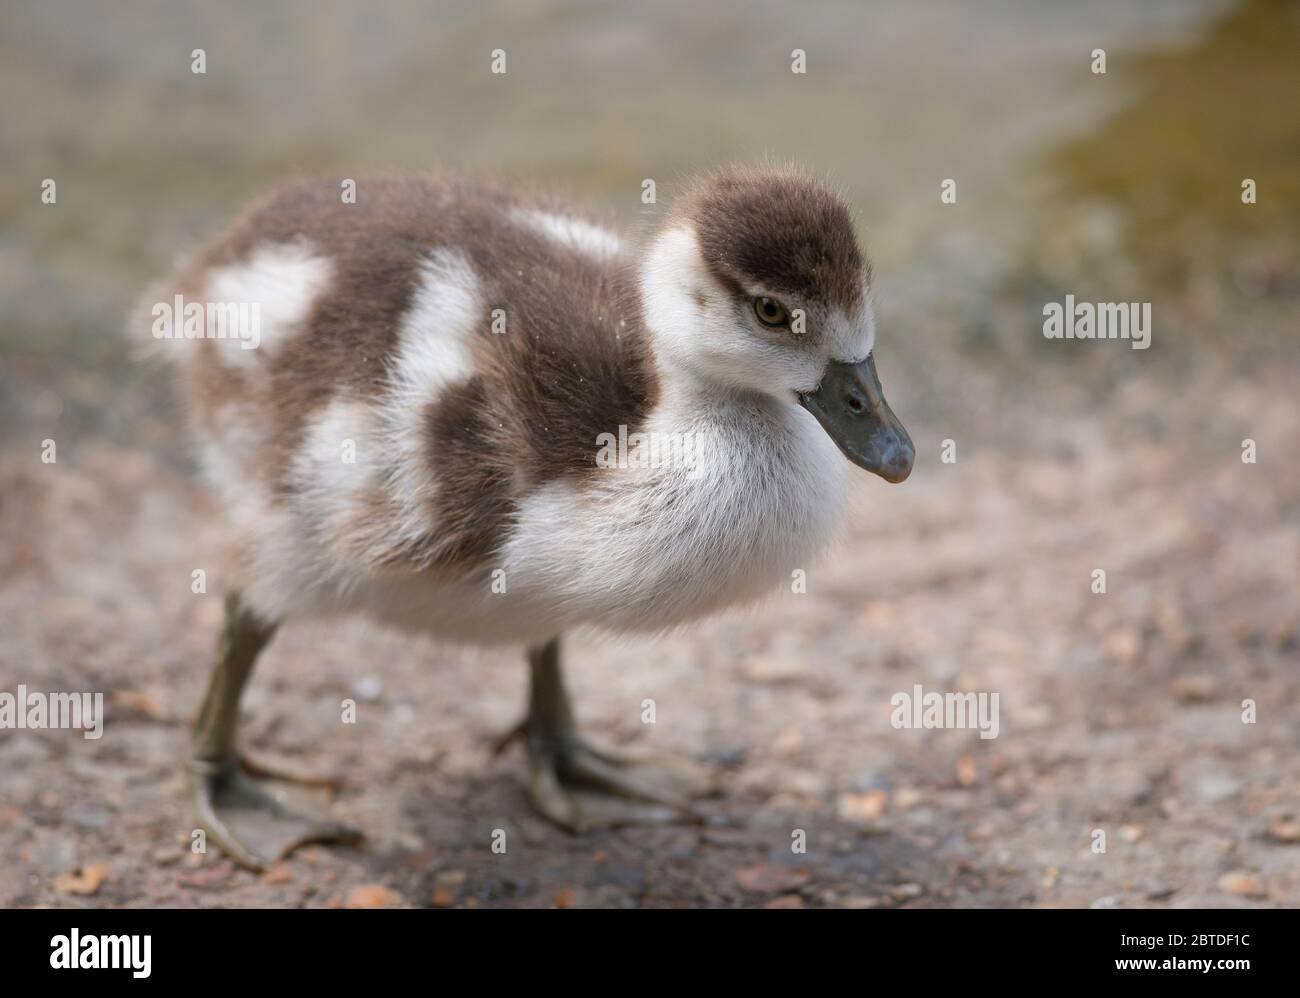 Egyptian Goose, Alopochen aegyptiaca, Chick, Angleterre Royaume-Uni Banque D'Images